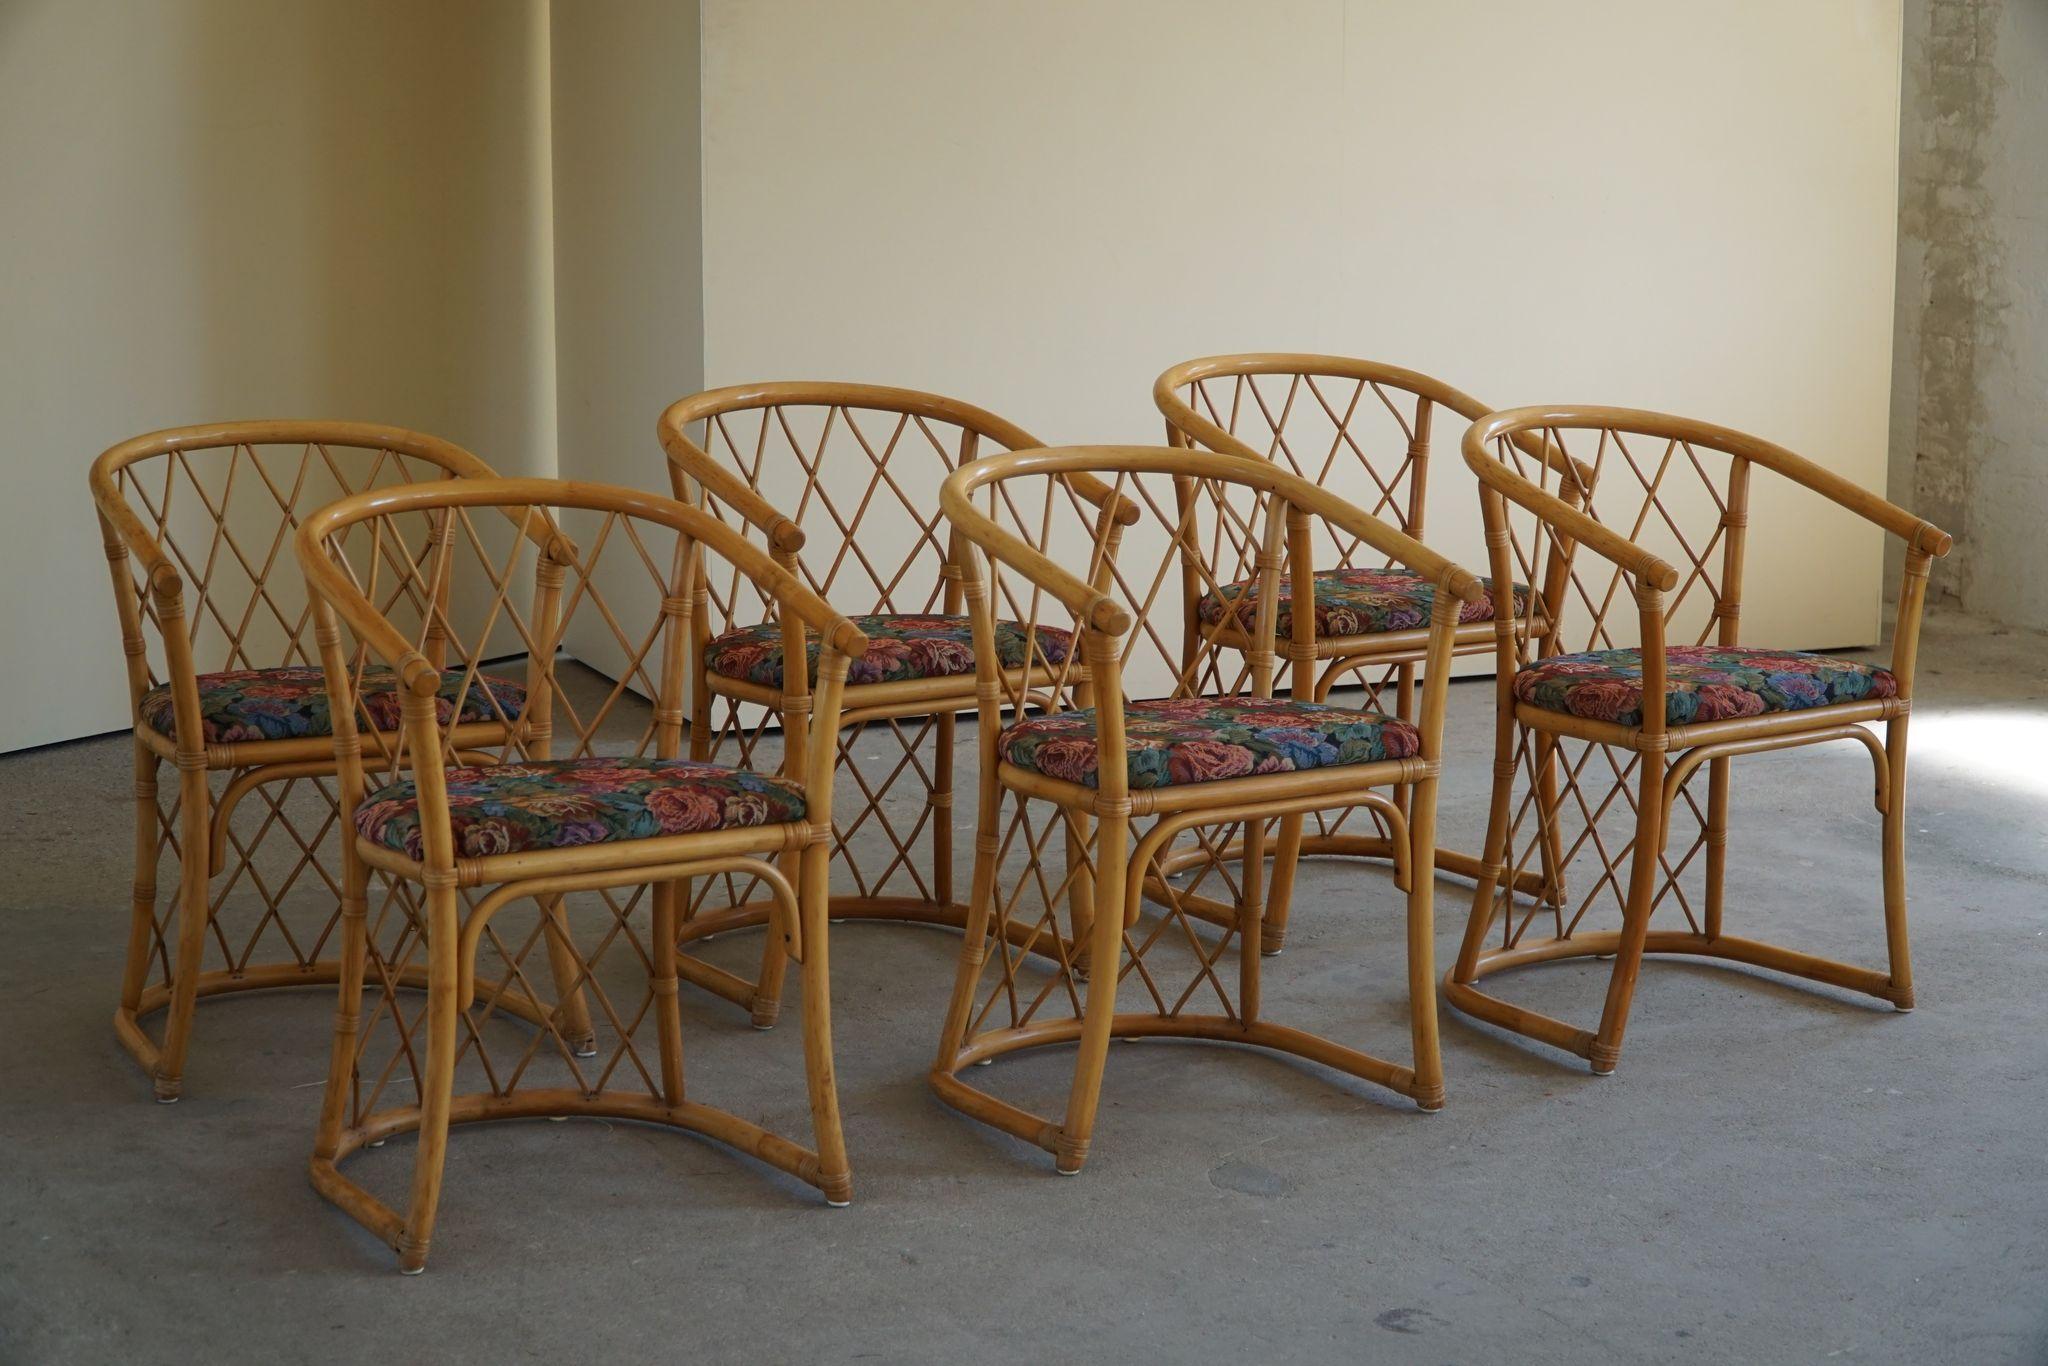 Set of 6 Sculptural Vintage Bamboo Dining Chairs, Danish Modern, Made in 1960s For Sale 2